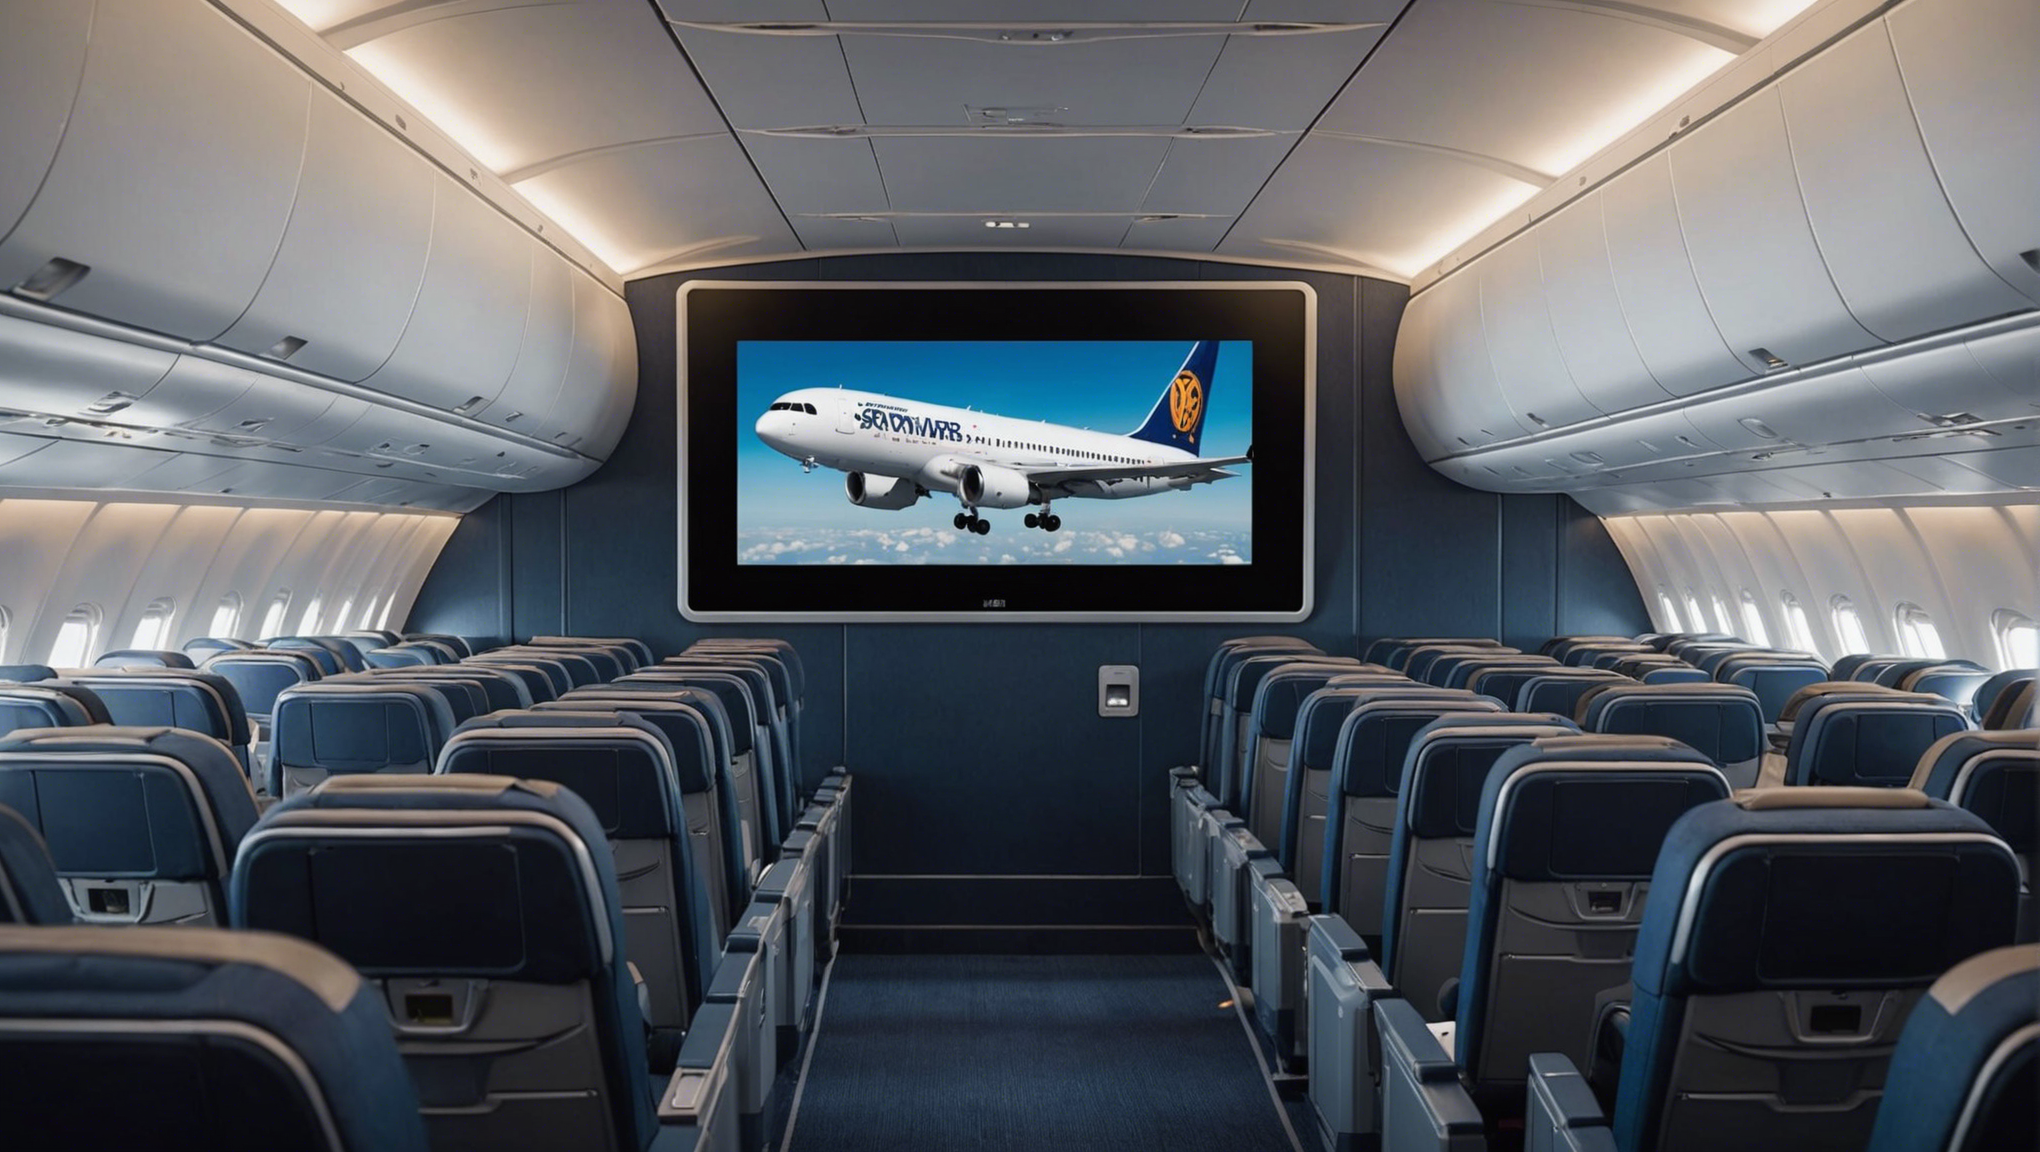 find out which airlines offer the largest in-flight entertainment screens and enjoy an exceptional travel experience.